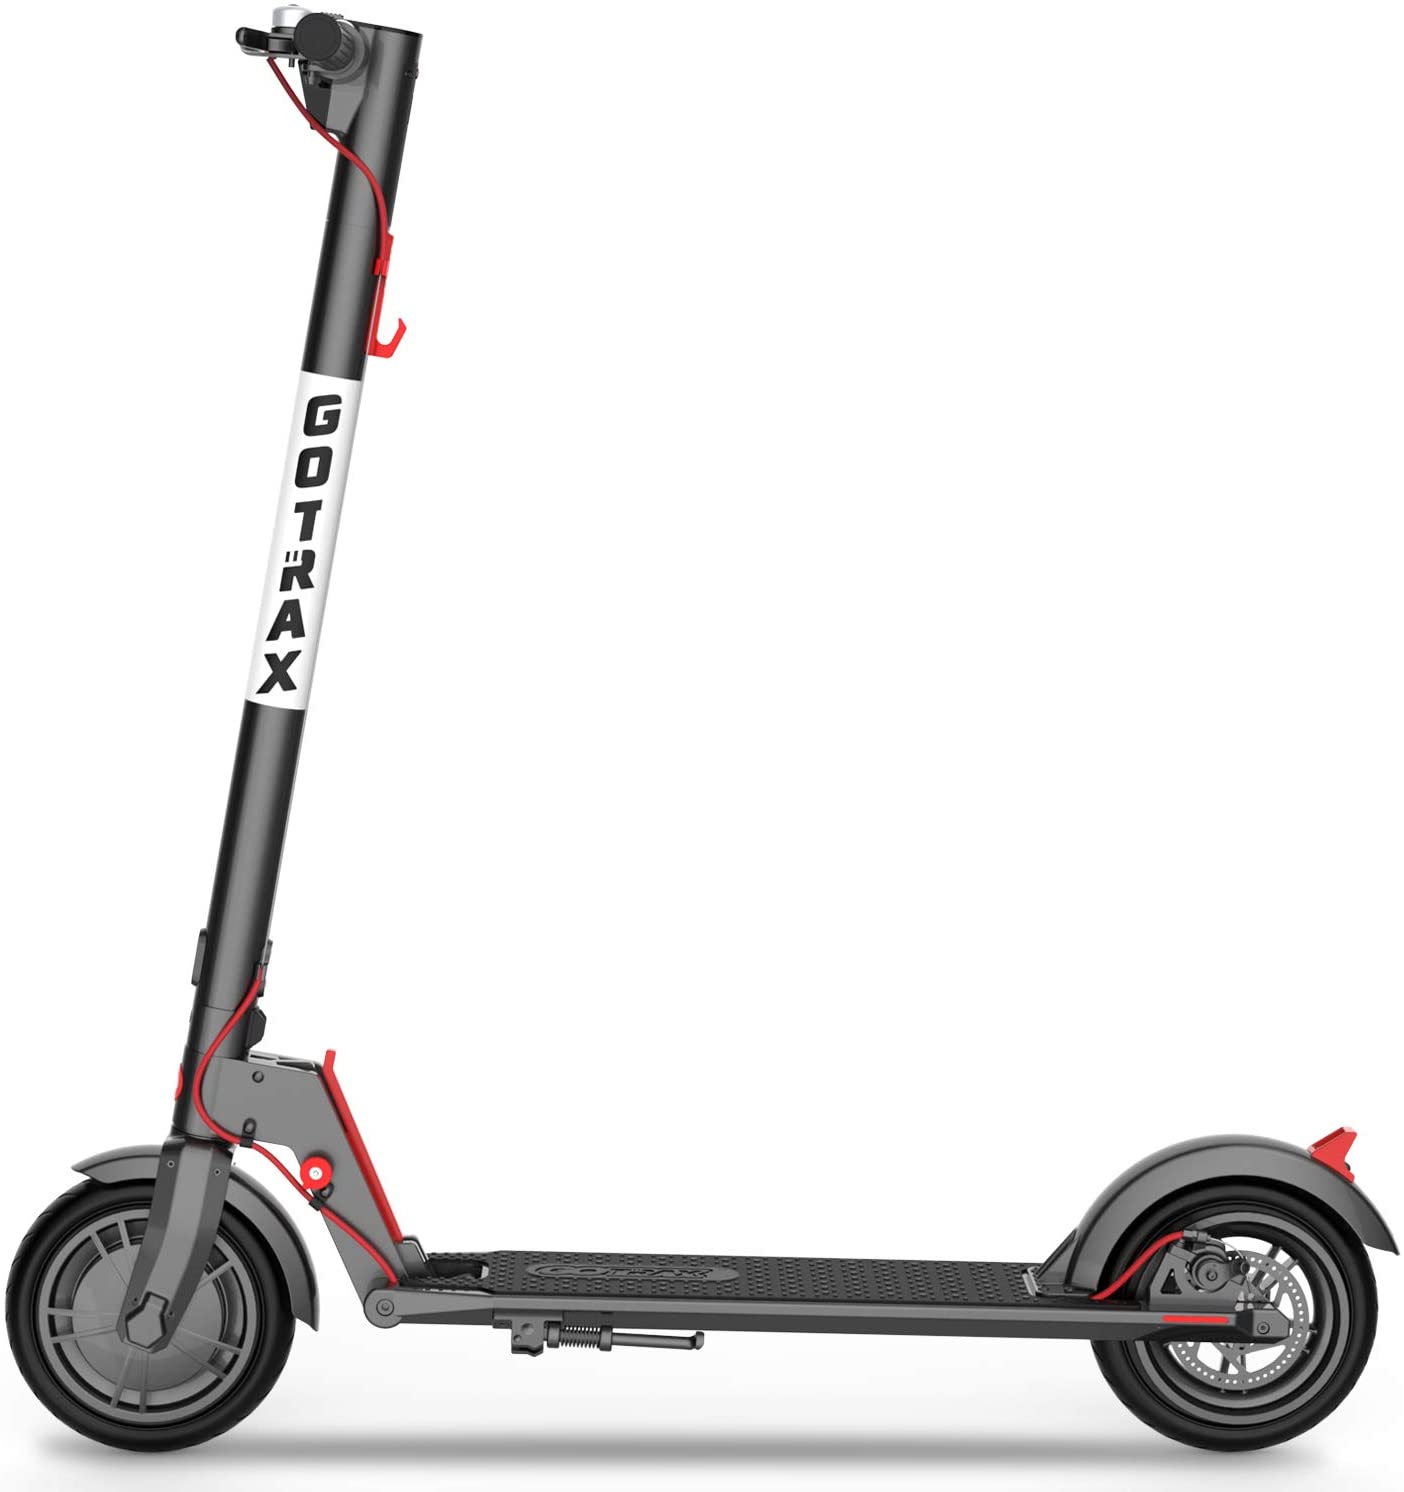 5.Gotrax GXL V2 Commuting Electric Scooter